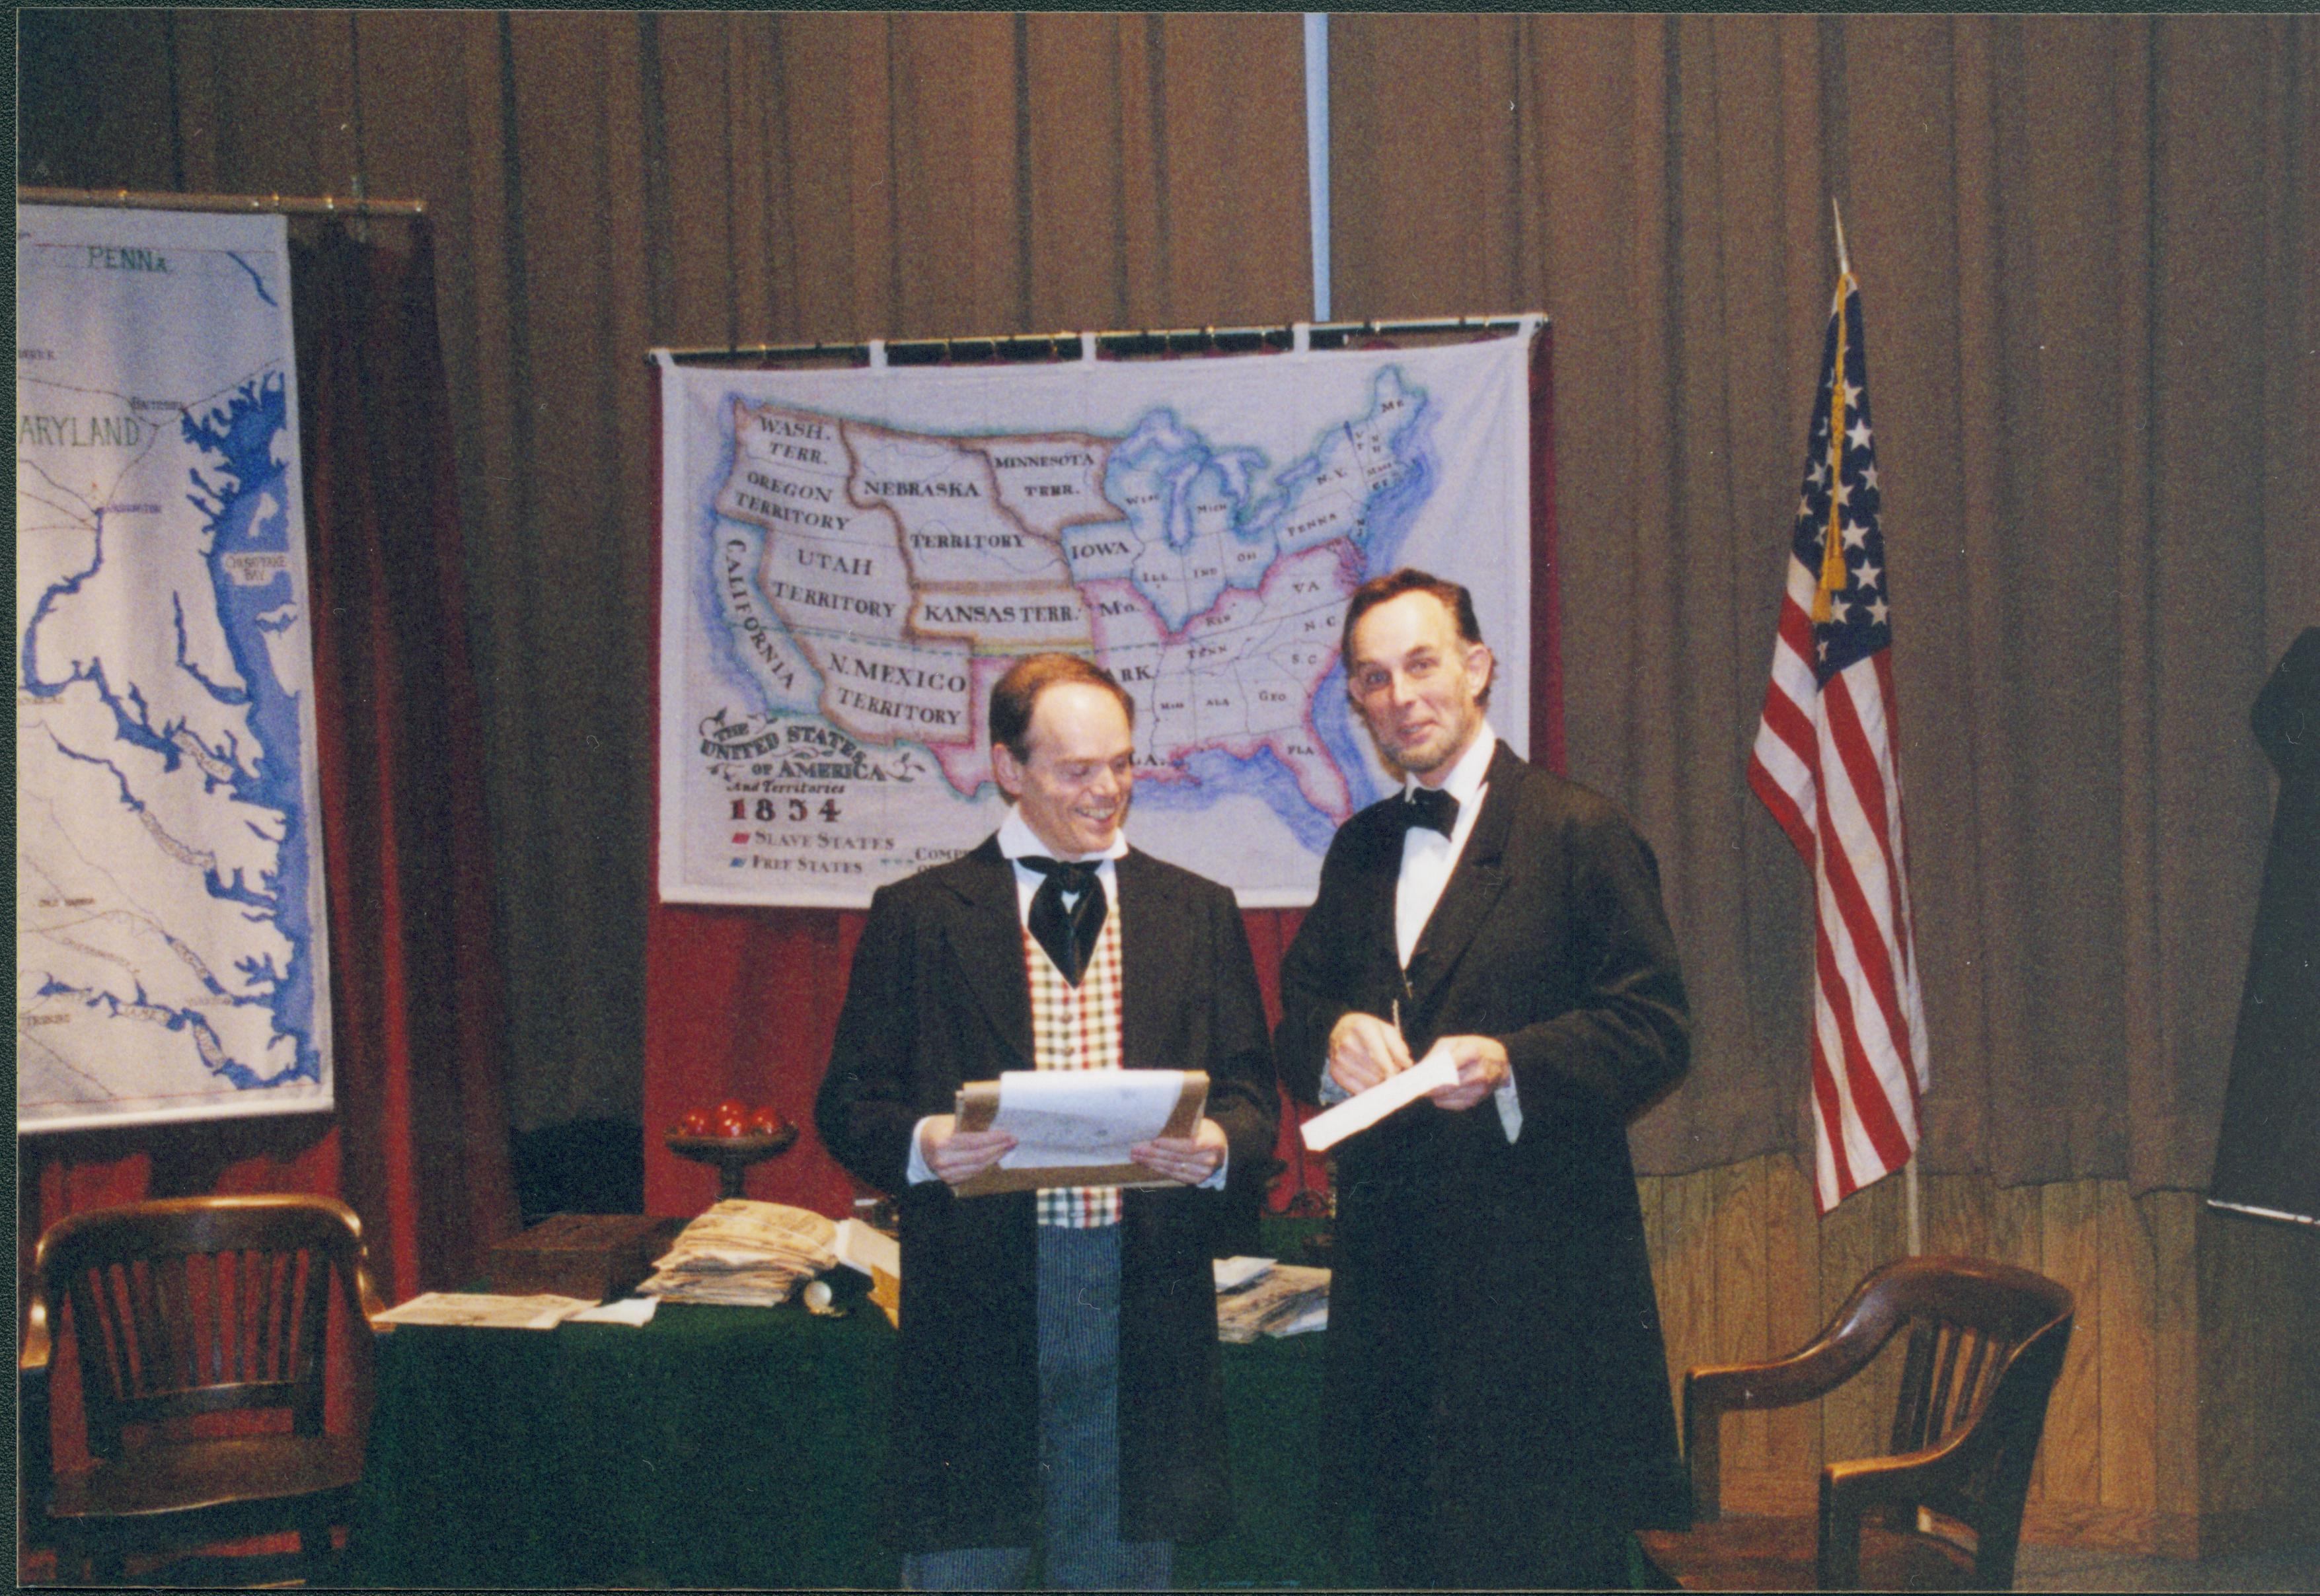 Fritz Klein and Drew Gibson in discussion in front of U.S. map. Lincoln Home NHS- Fritz Klein and Drew Gibson visit, roll 2002-1, exp 11 Klein, Gibson, visit